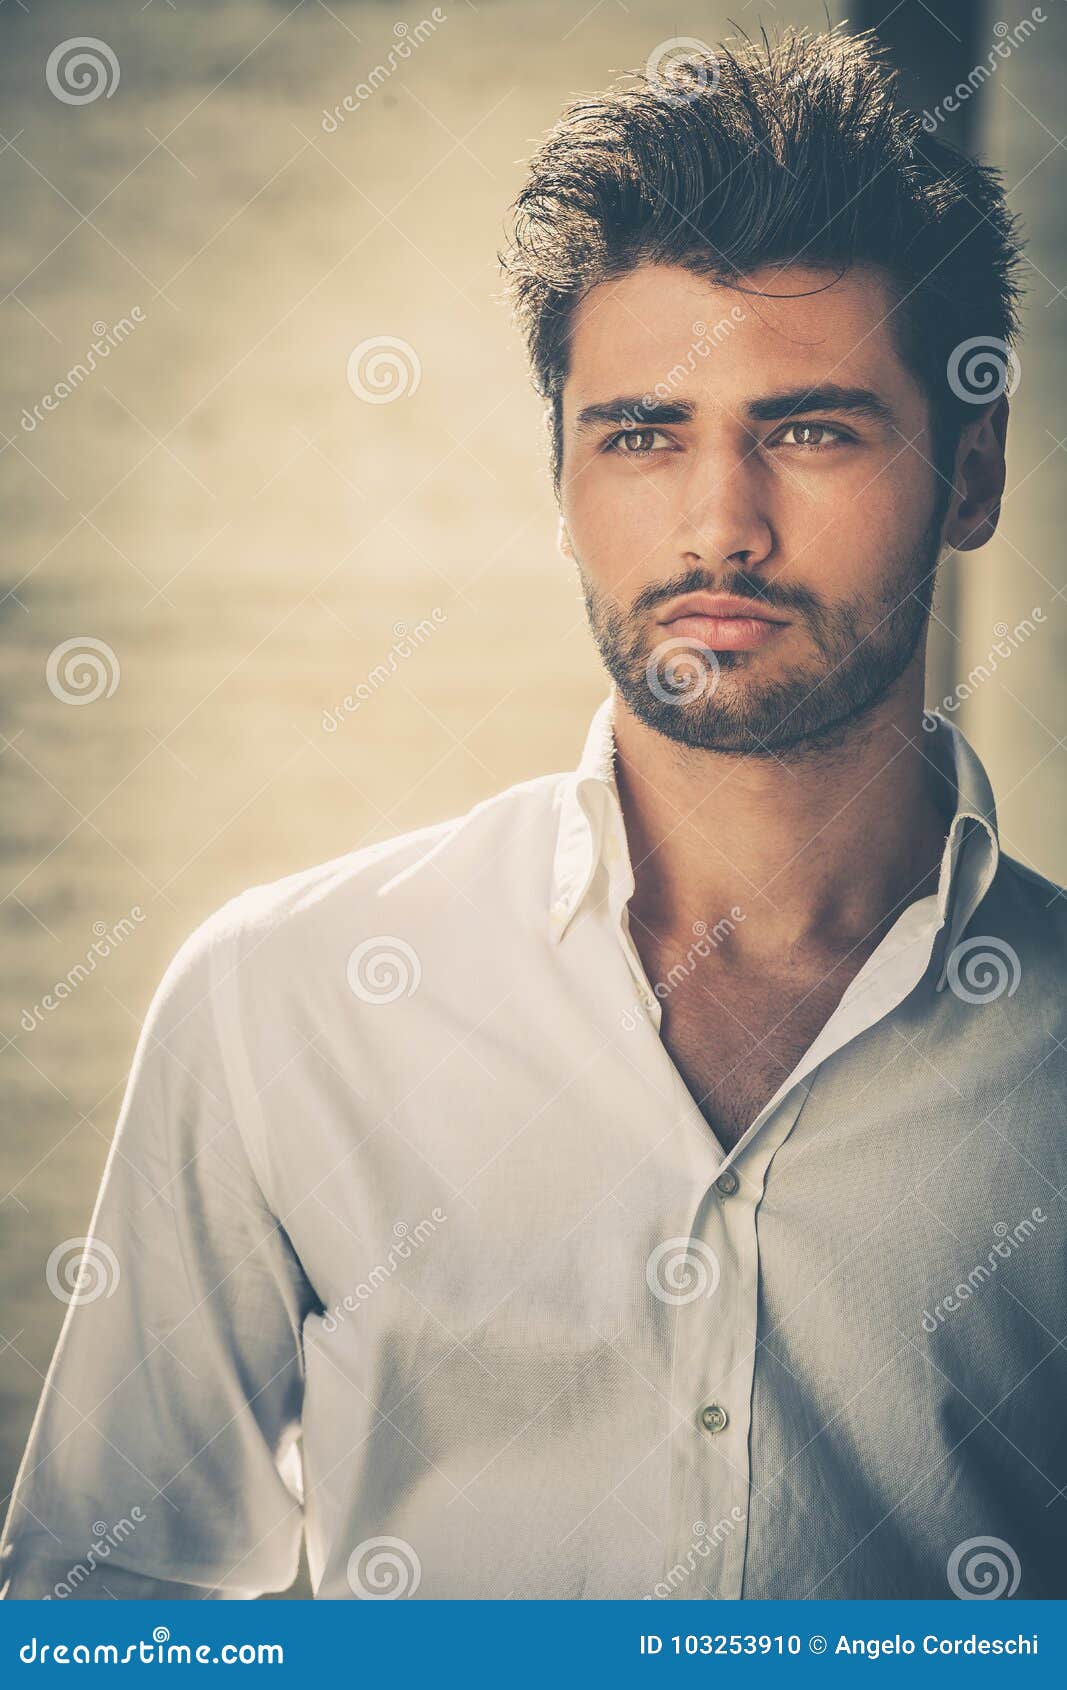 handsome young man portrait. intense look and eye-catching beauty